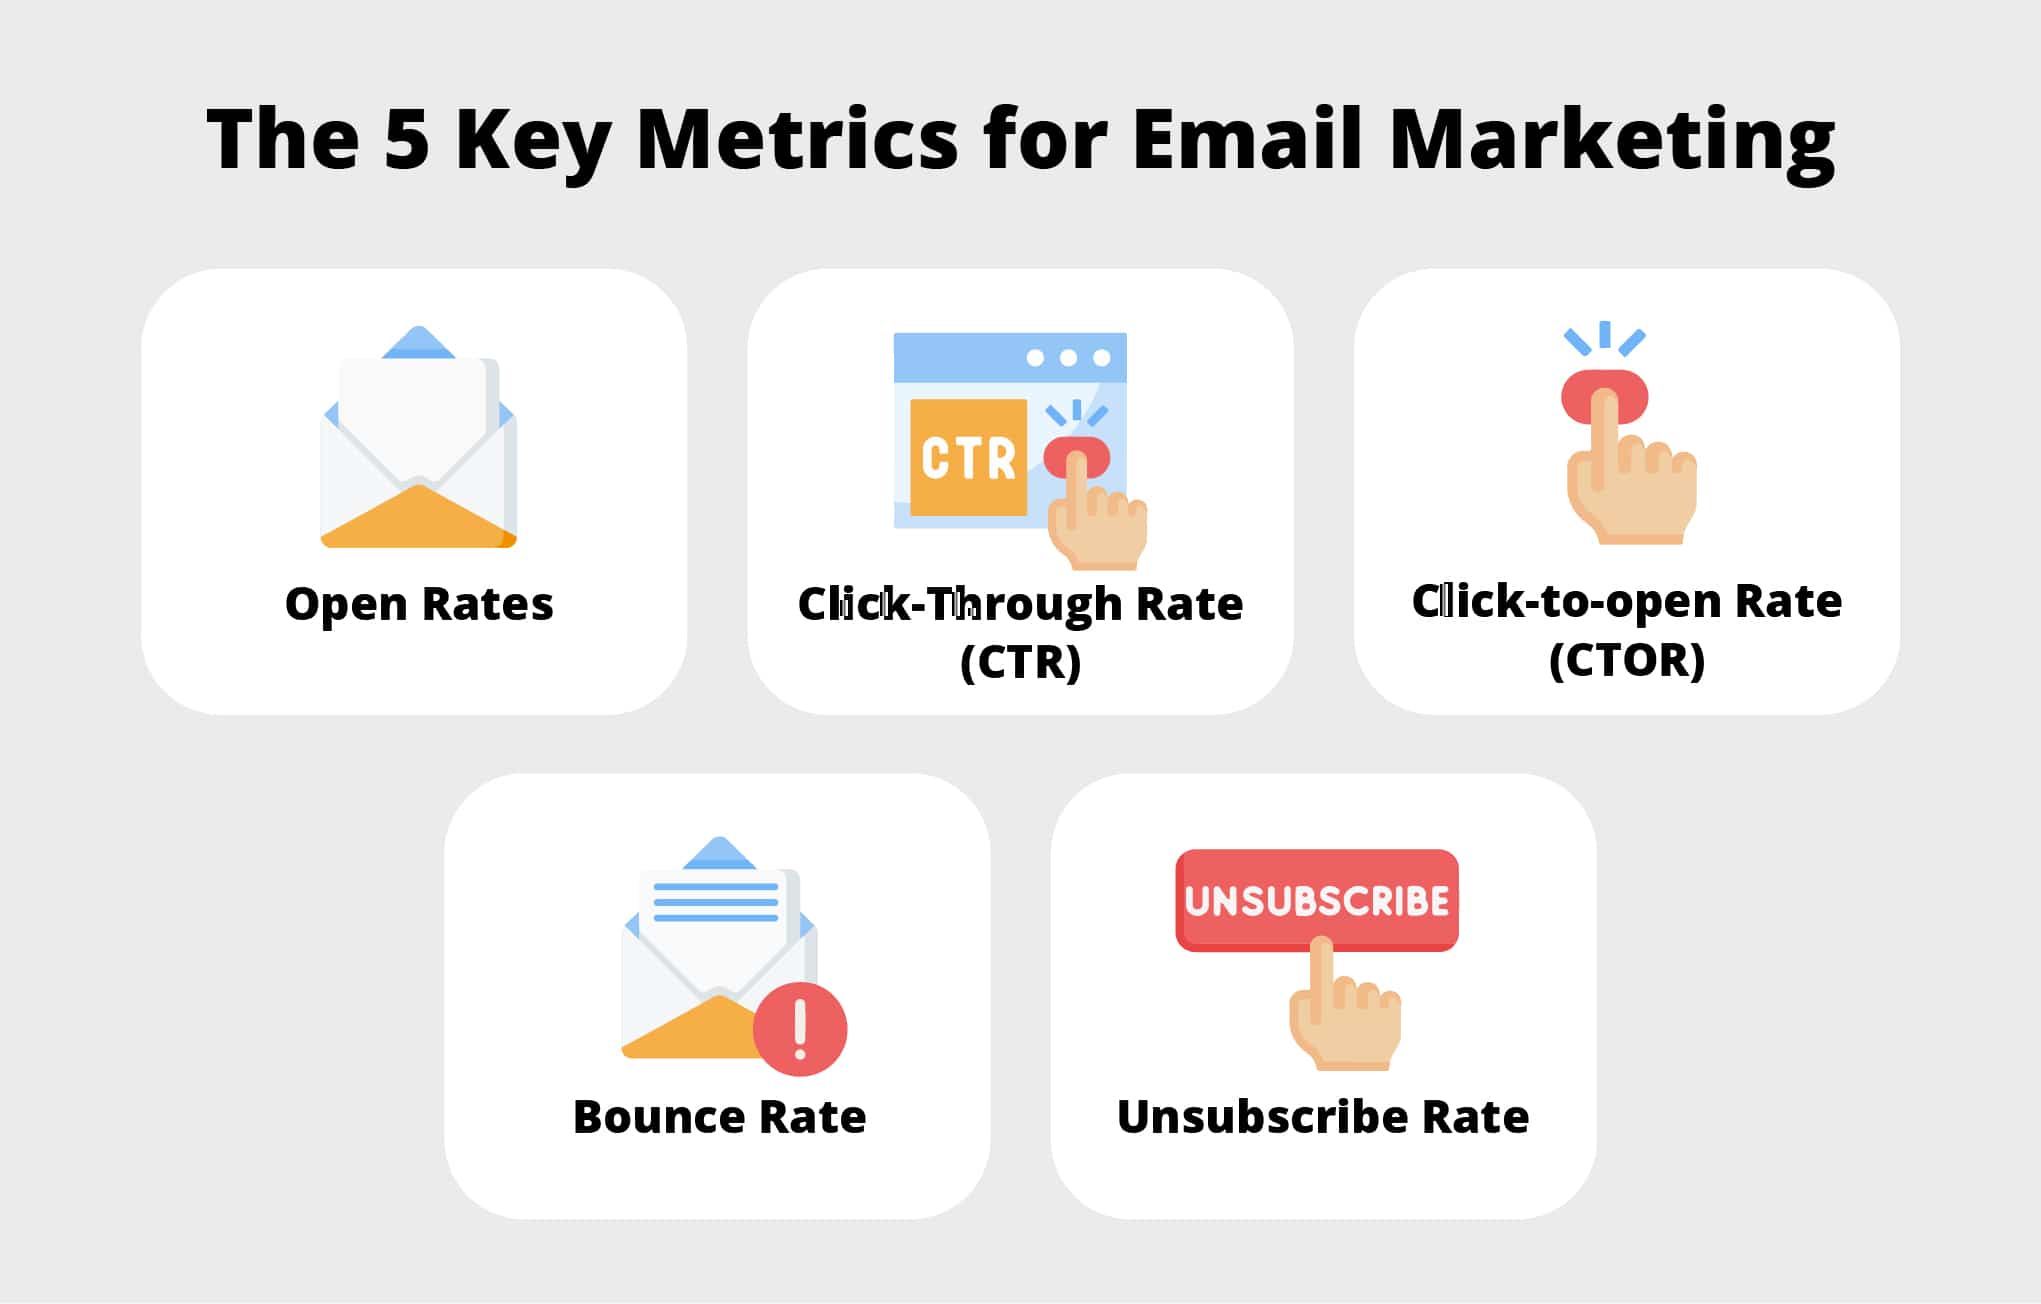 The 5 Key Metrics for email marketing